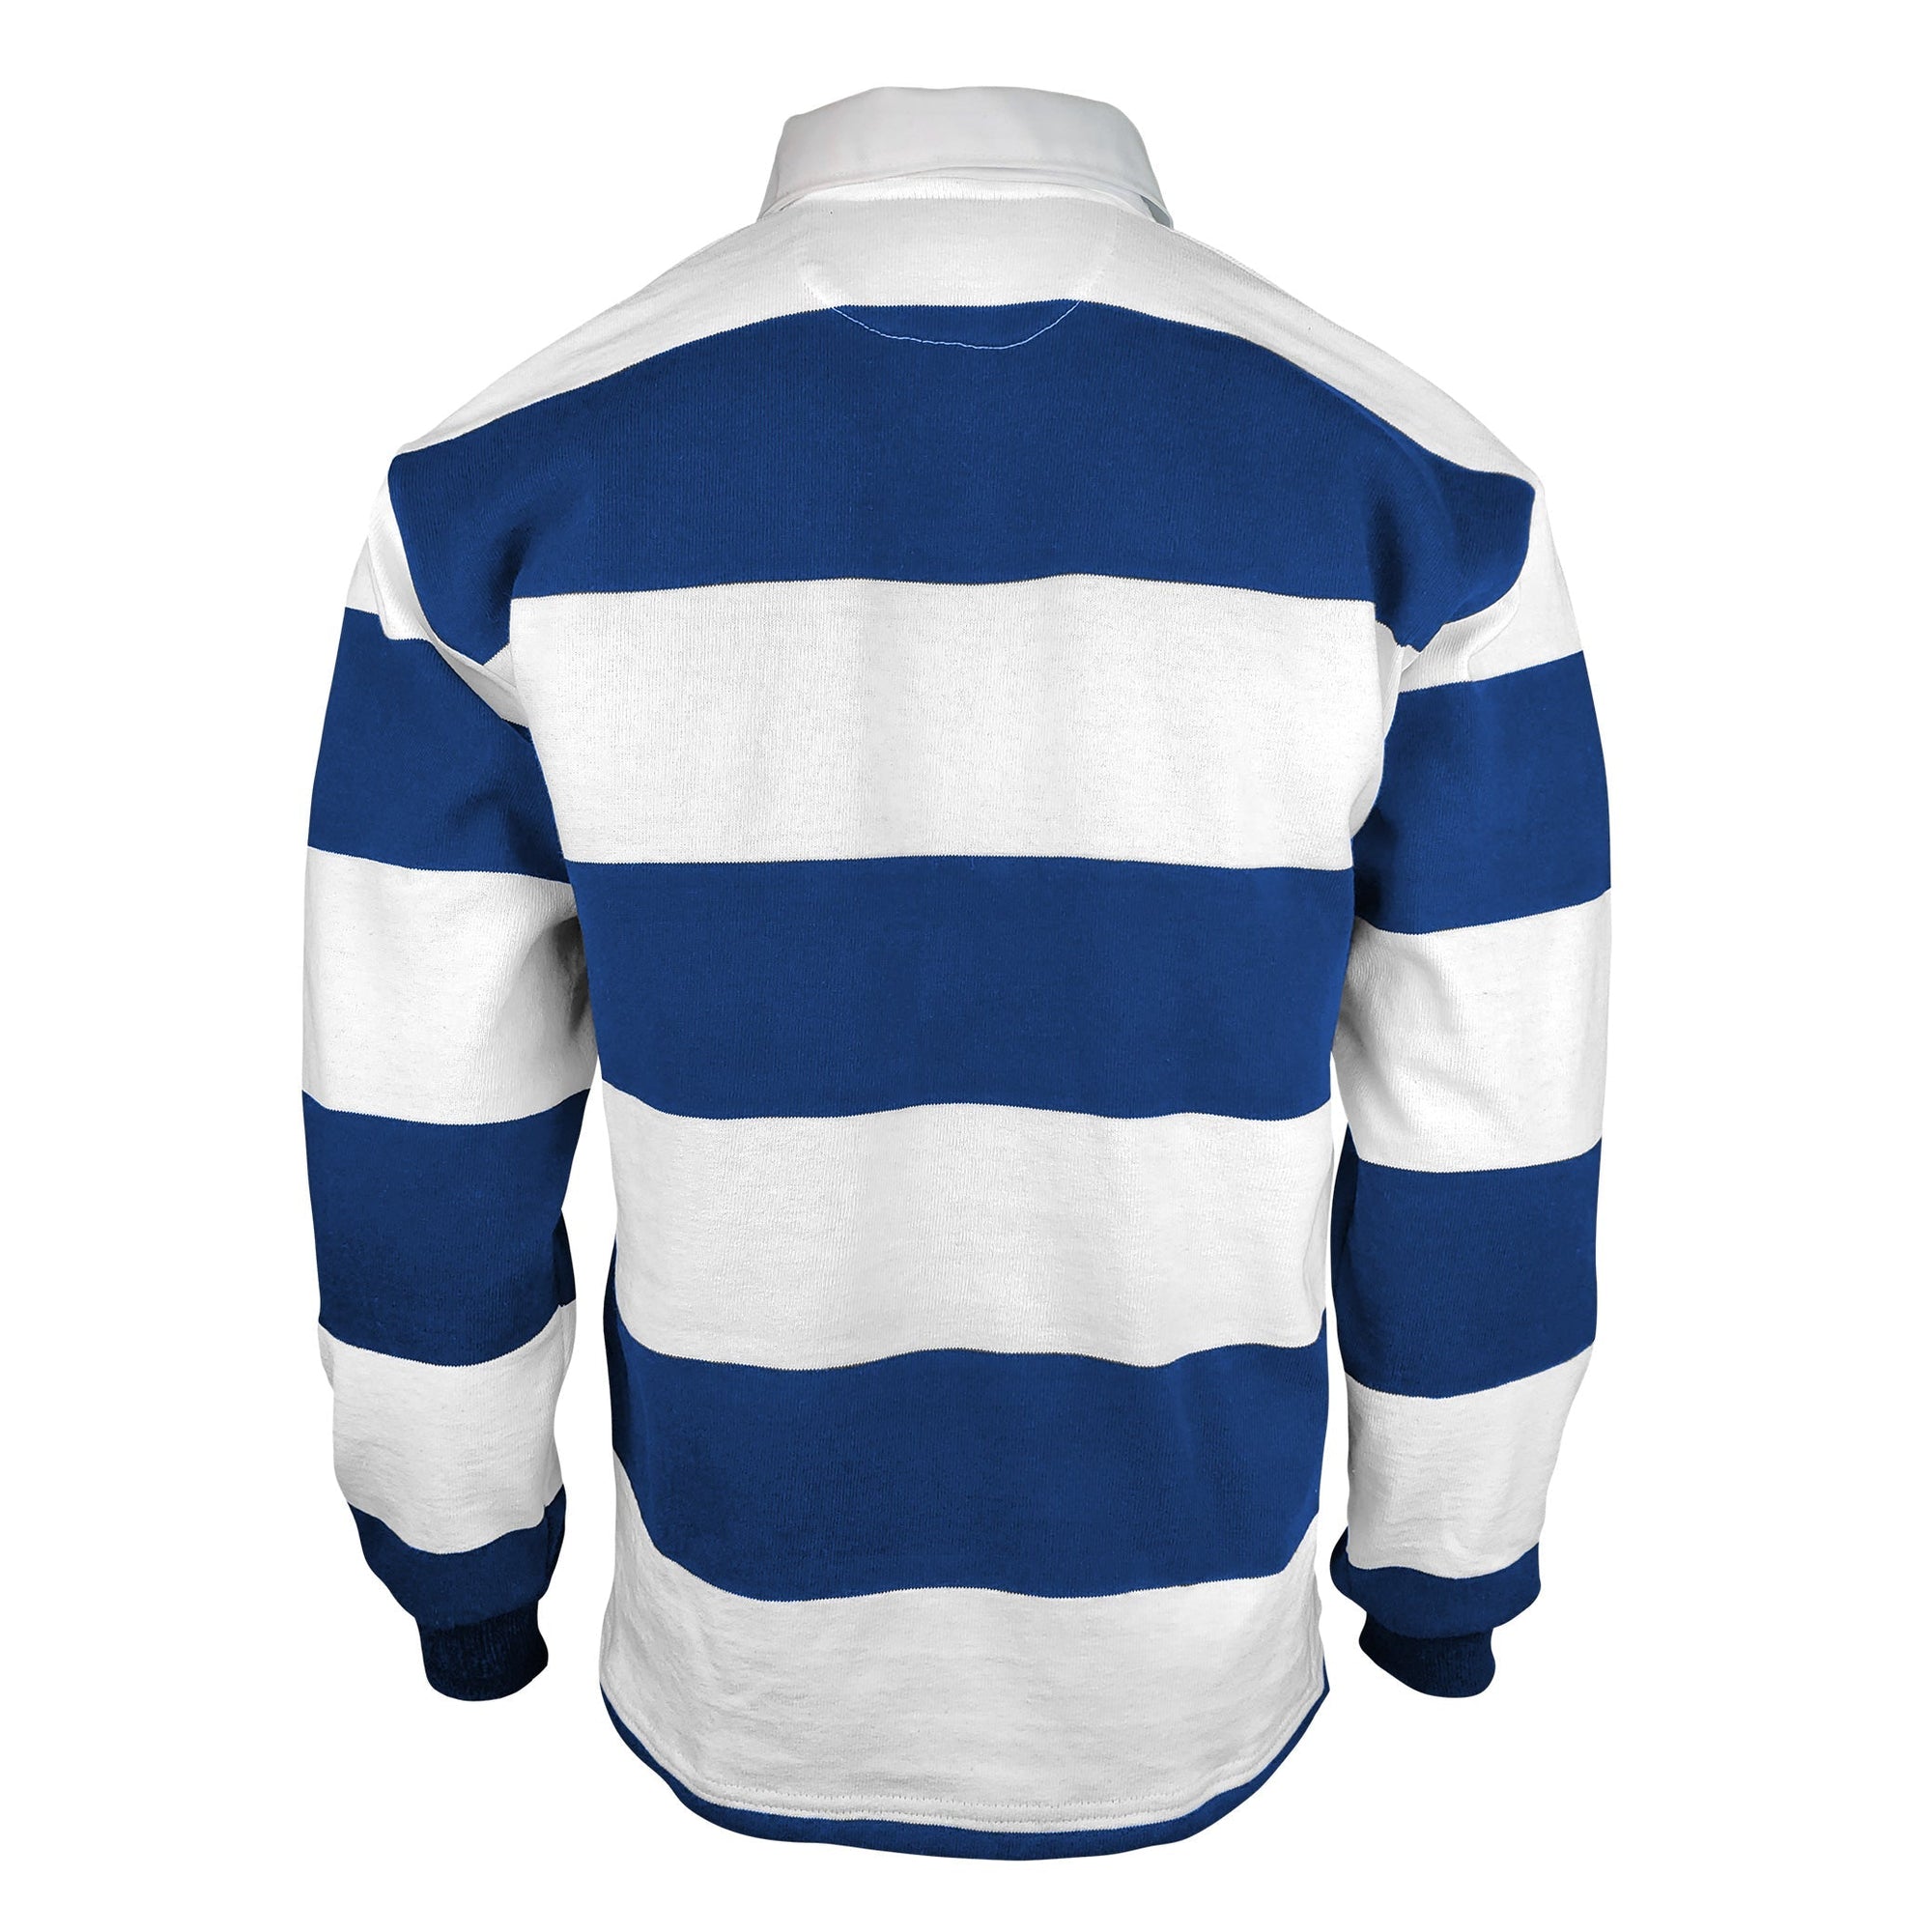 Rugby Imports SPS Wolves Rugby 4 Inch Stripe Jersey